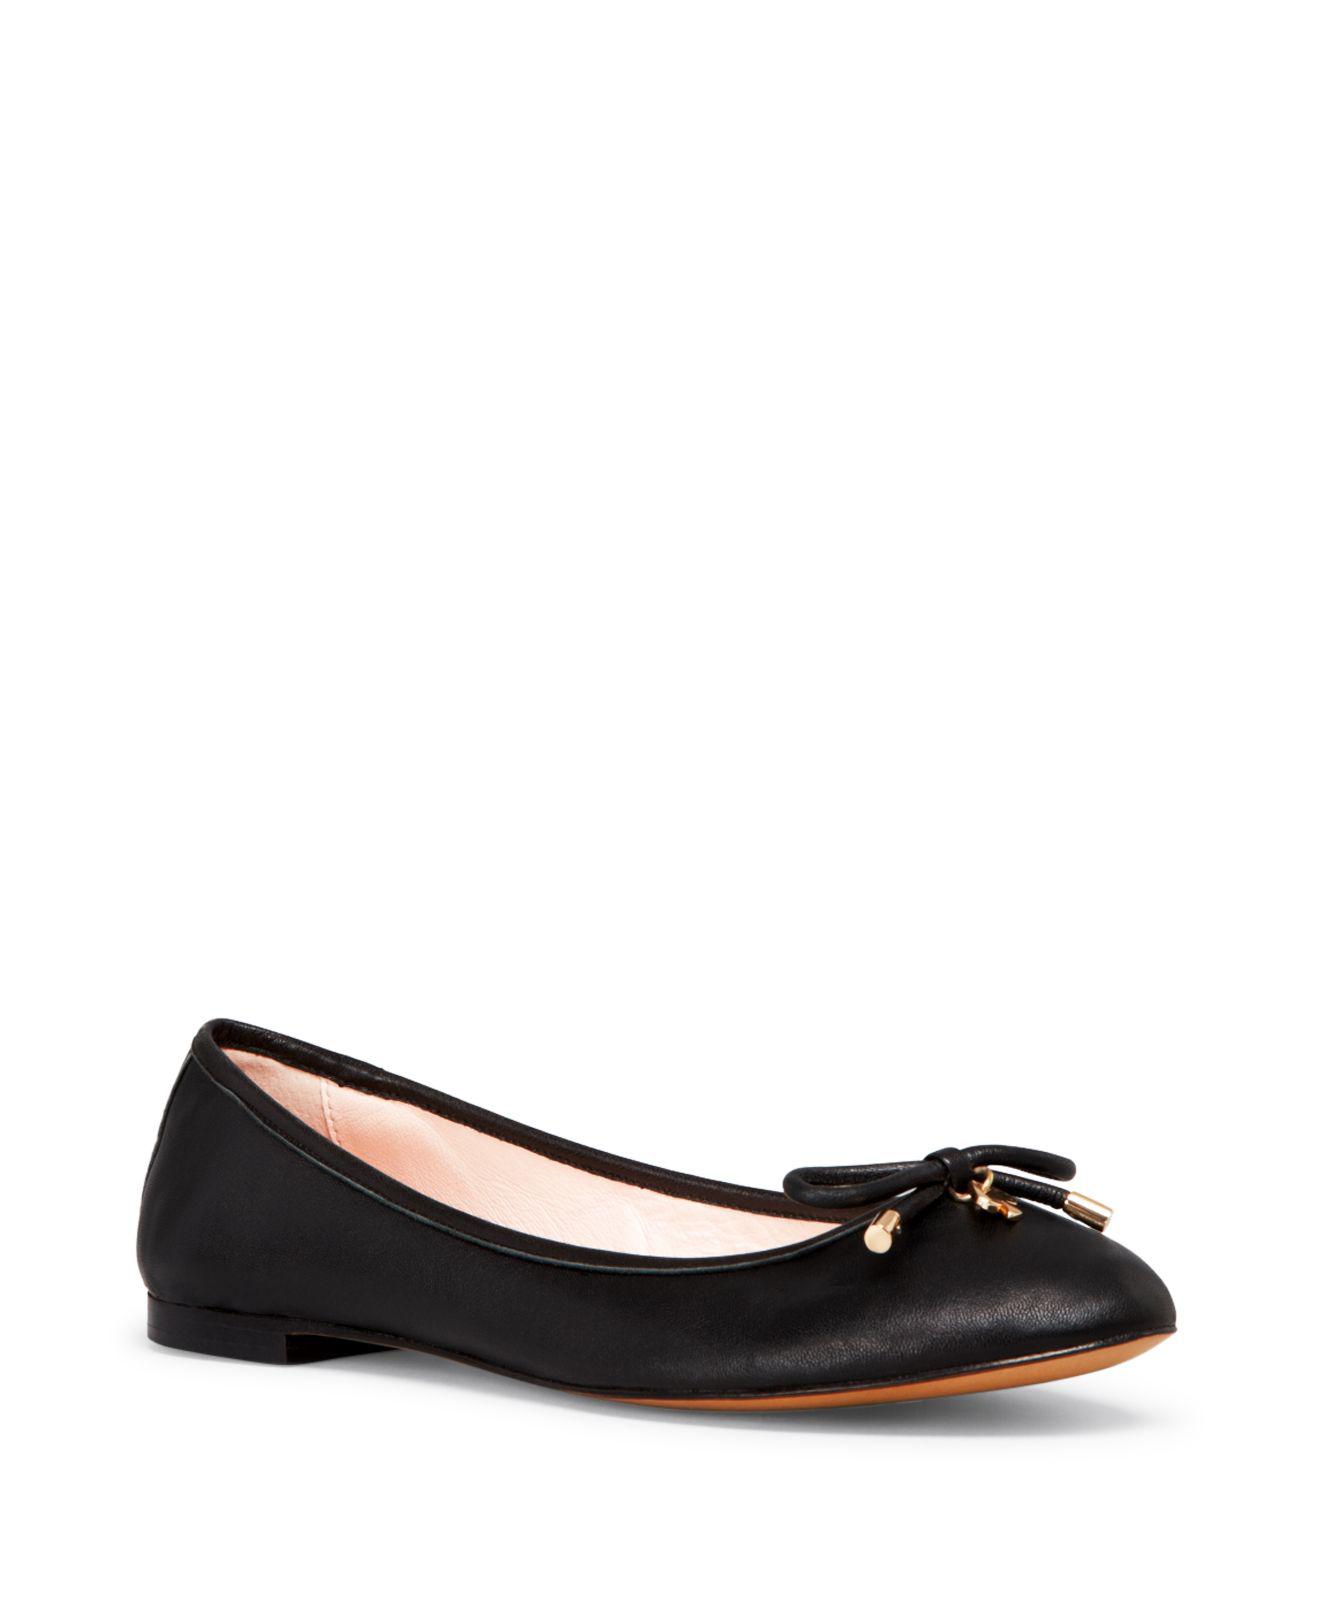 Kate Spade Willa Bow Ballet Flats in Black | Lyst